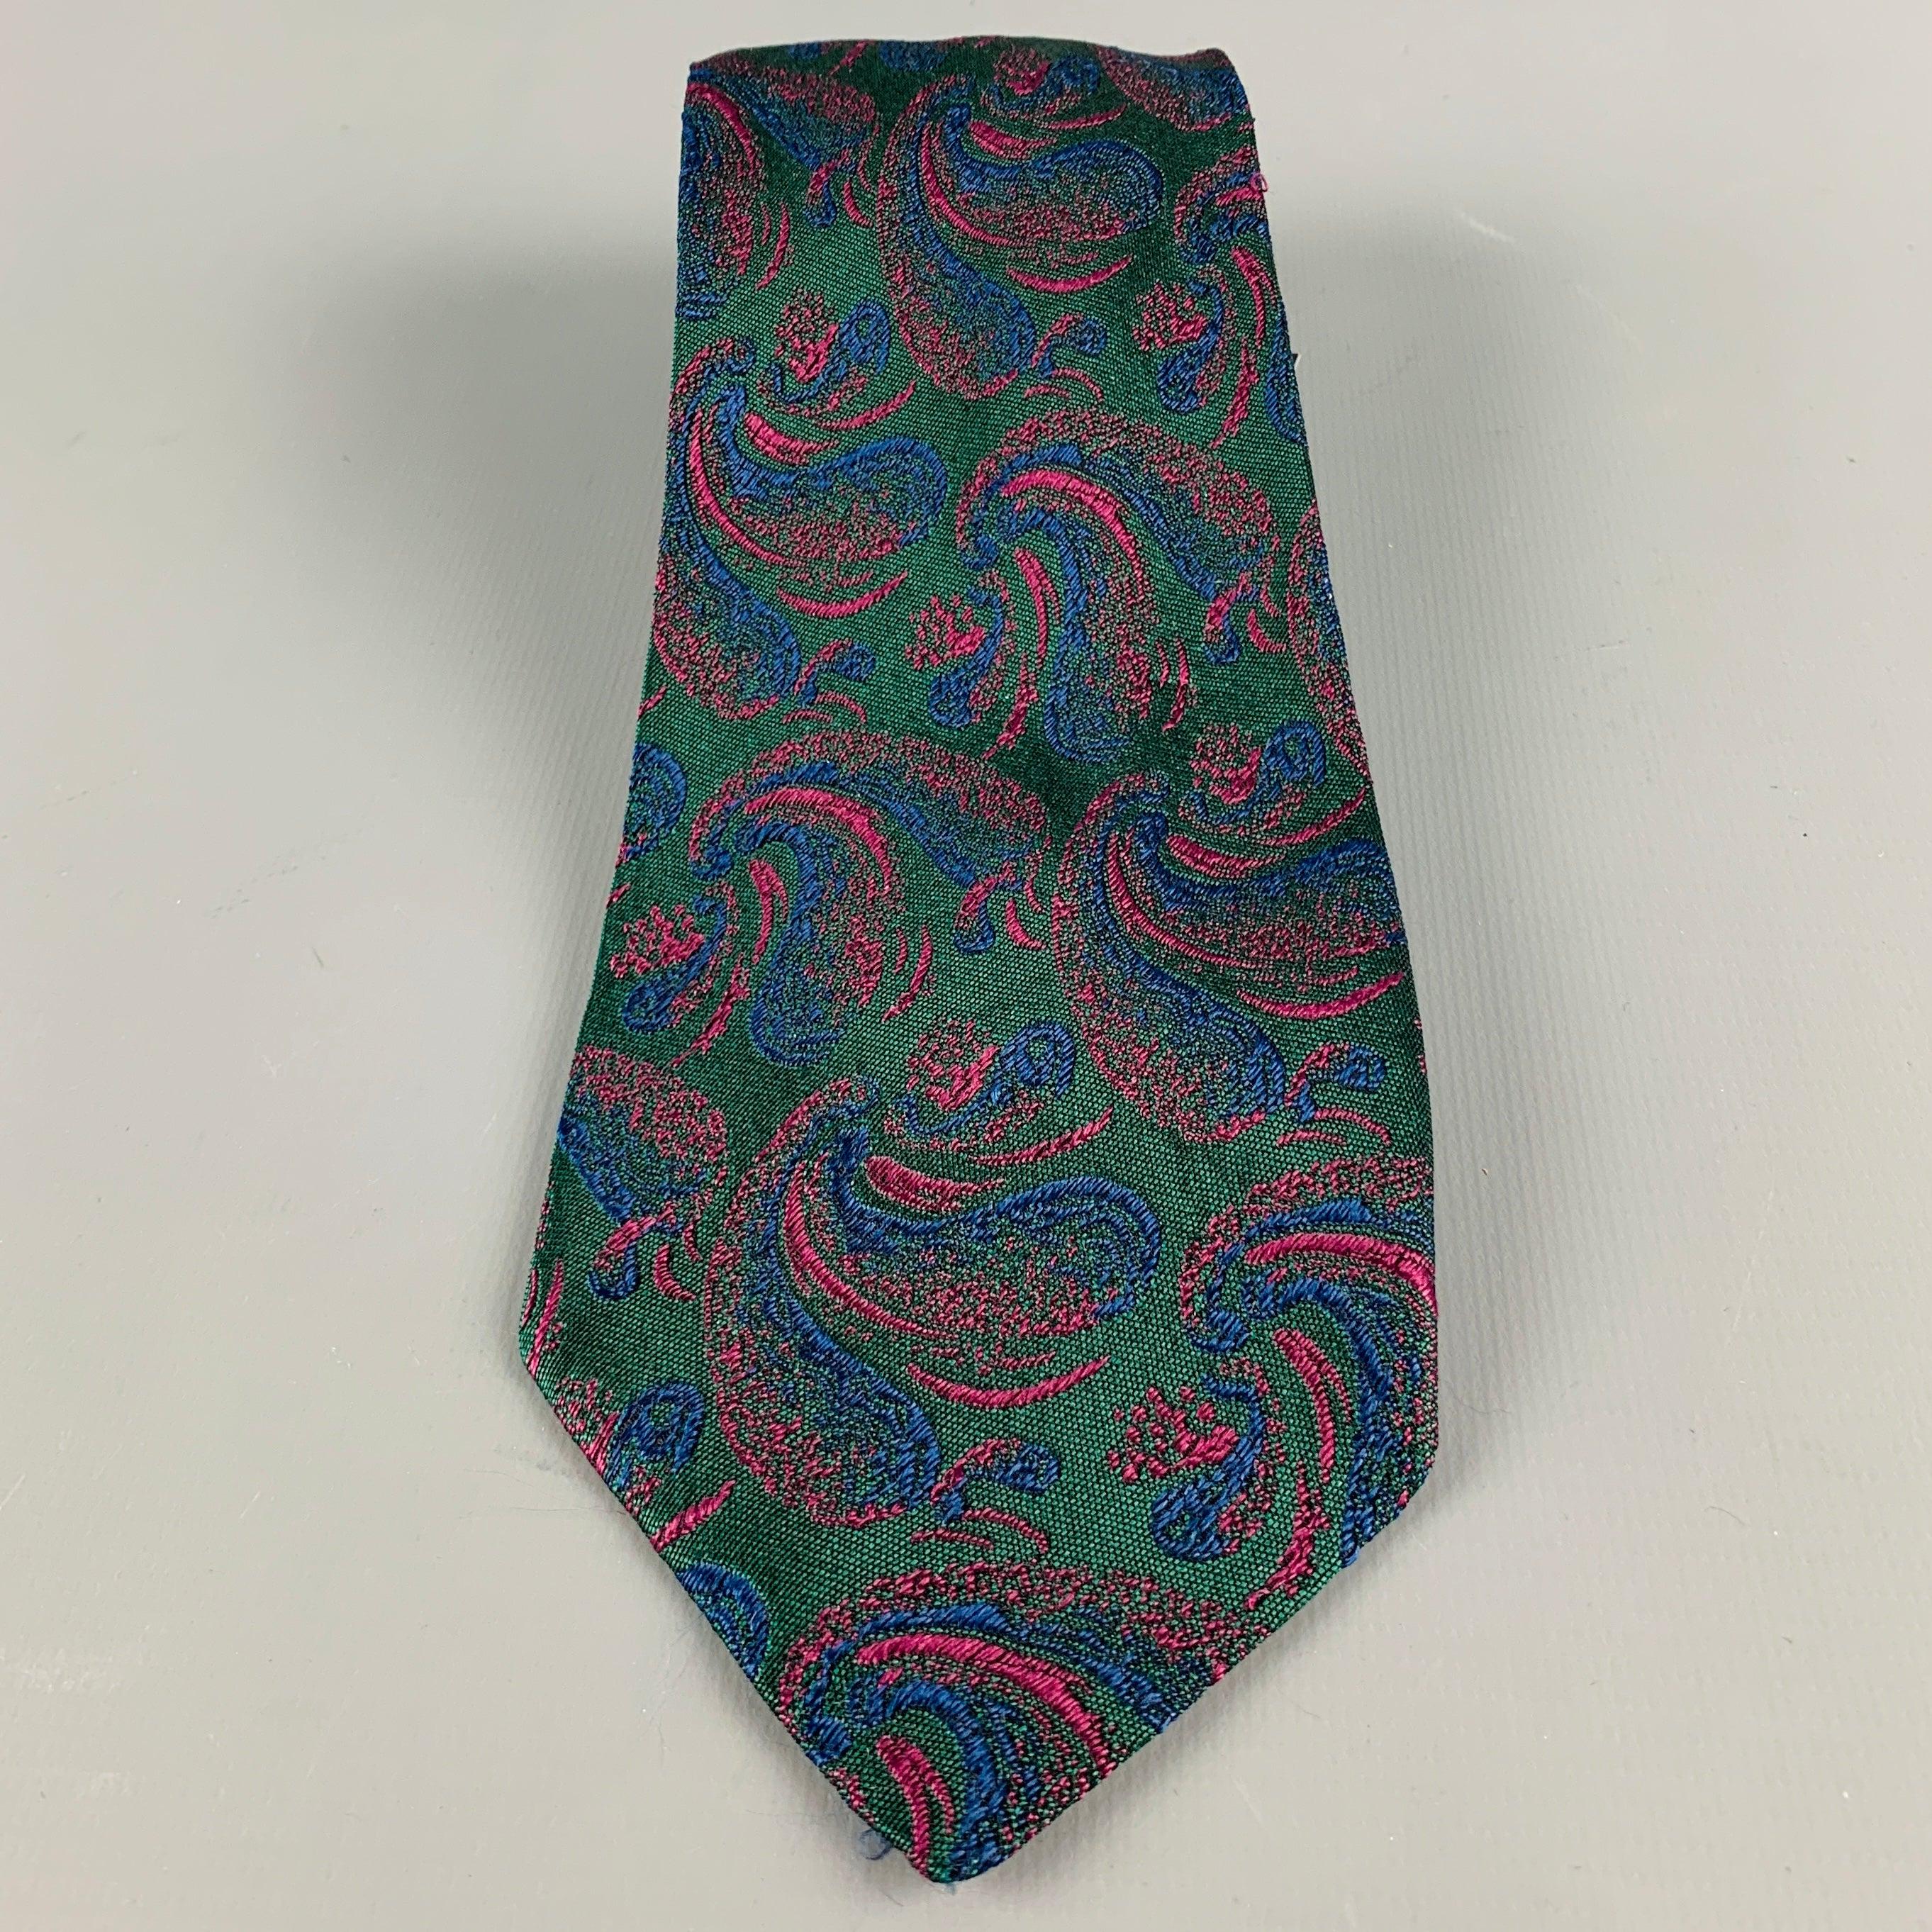 Vintage FENDI necktie in a green silk fabric featuring a purple paisley jacquard pattern. Handmade in Italy.Excellent Pre-Owned Condition. 

Measurements: 
  Width: 3.25 inches Length: 58 inches 
  
  
 
Reference No.: 128760
Category: Tie
More